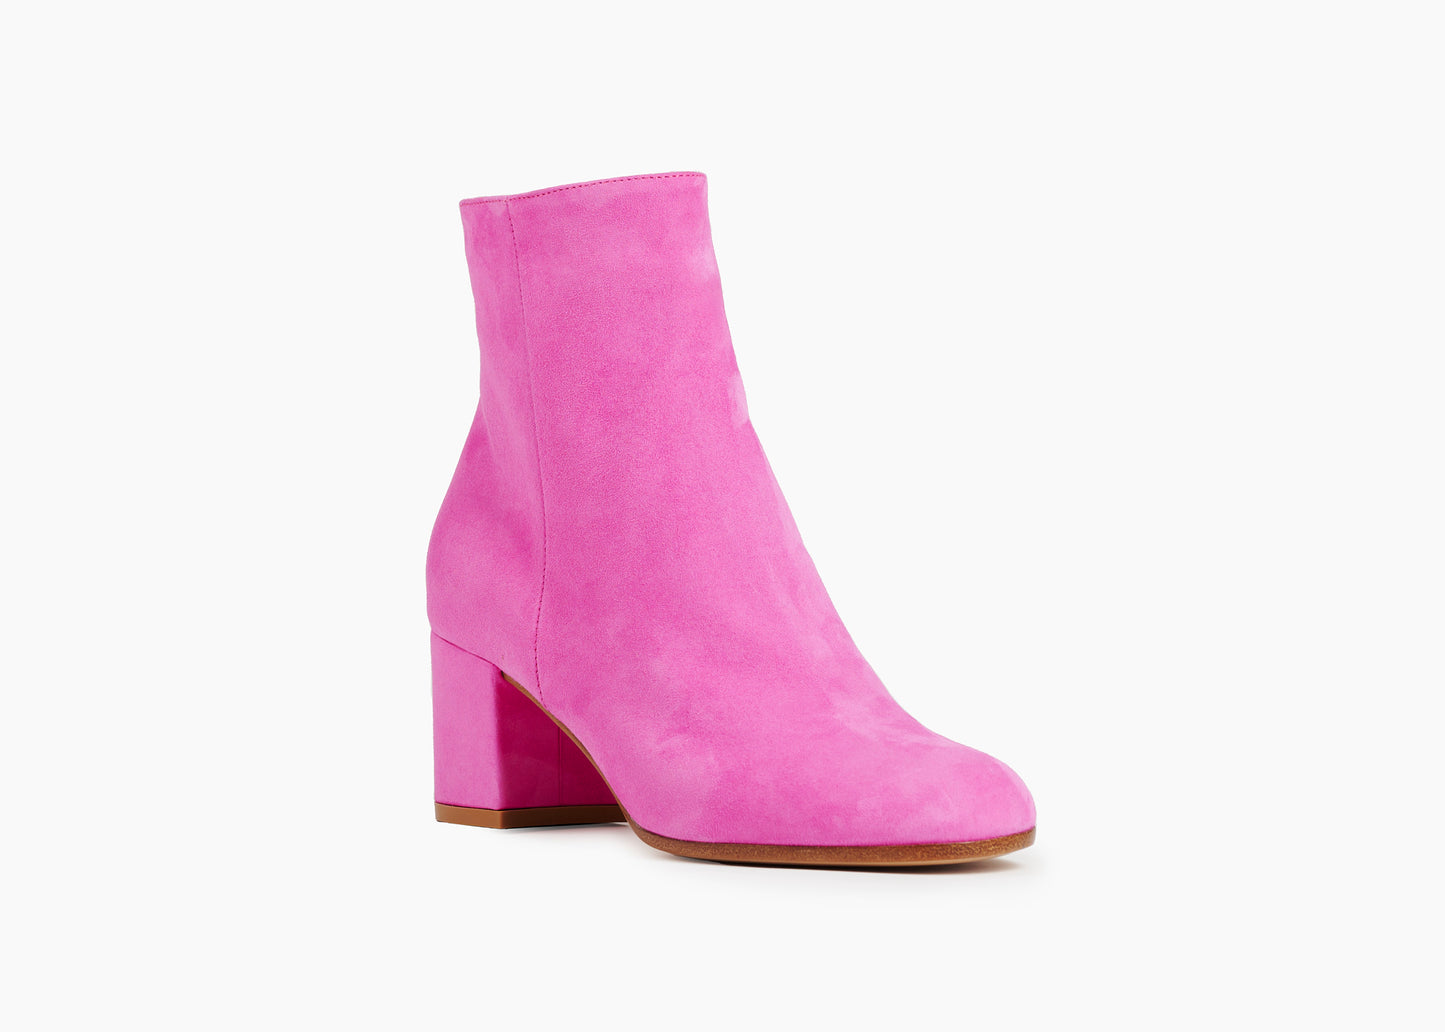 Margaux Ankle Boot Suede Fuchsia